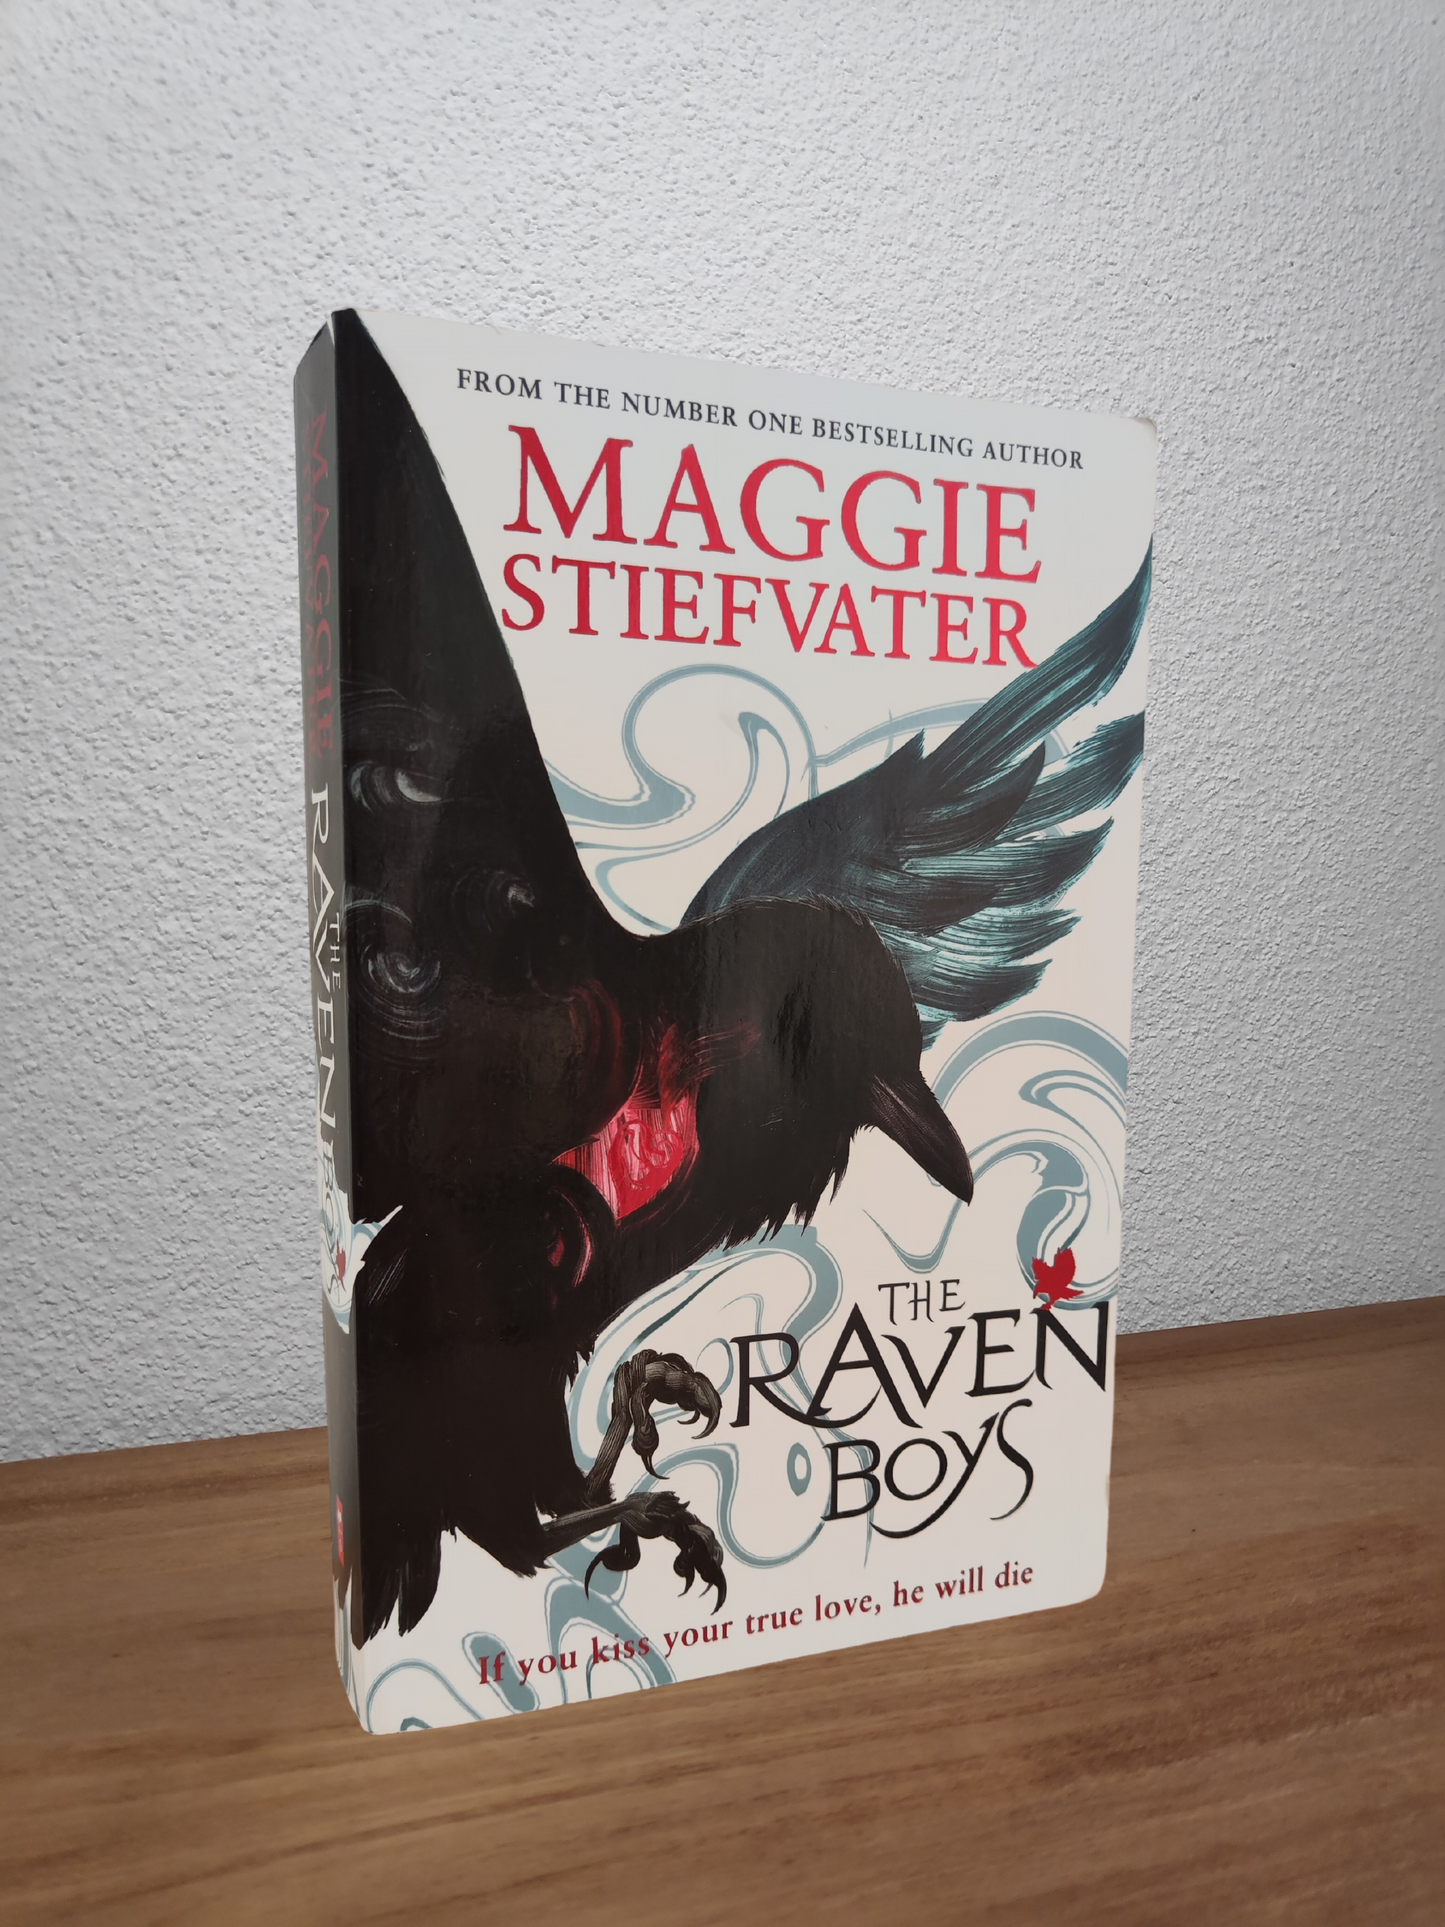 Maggie Stiefvater - The Raven Boys (Raven Cycle #1)